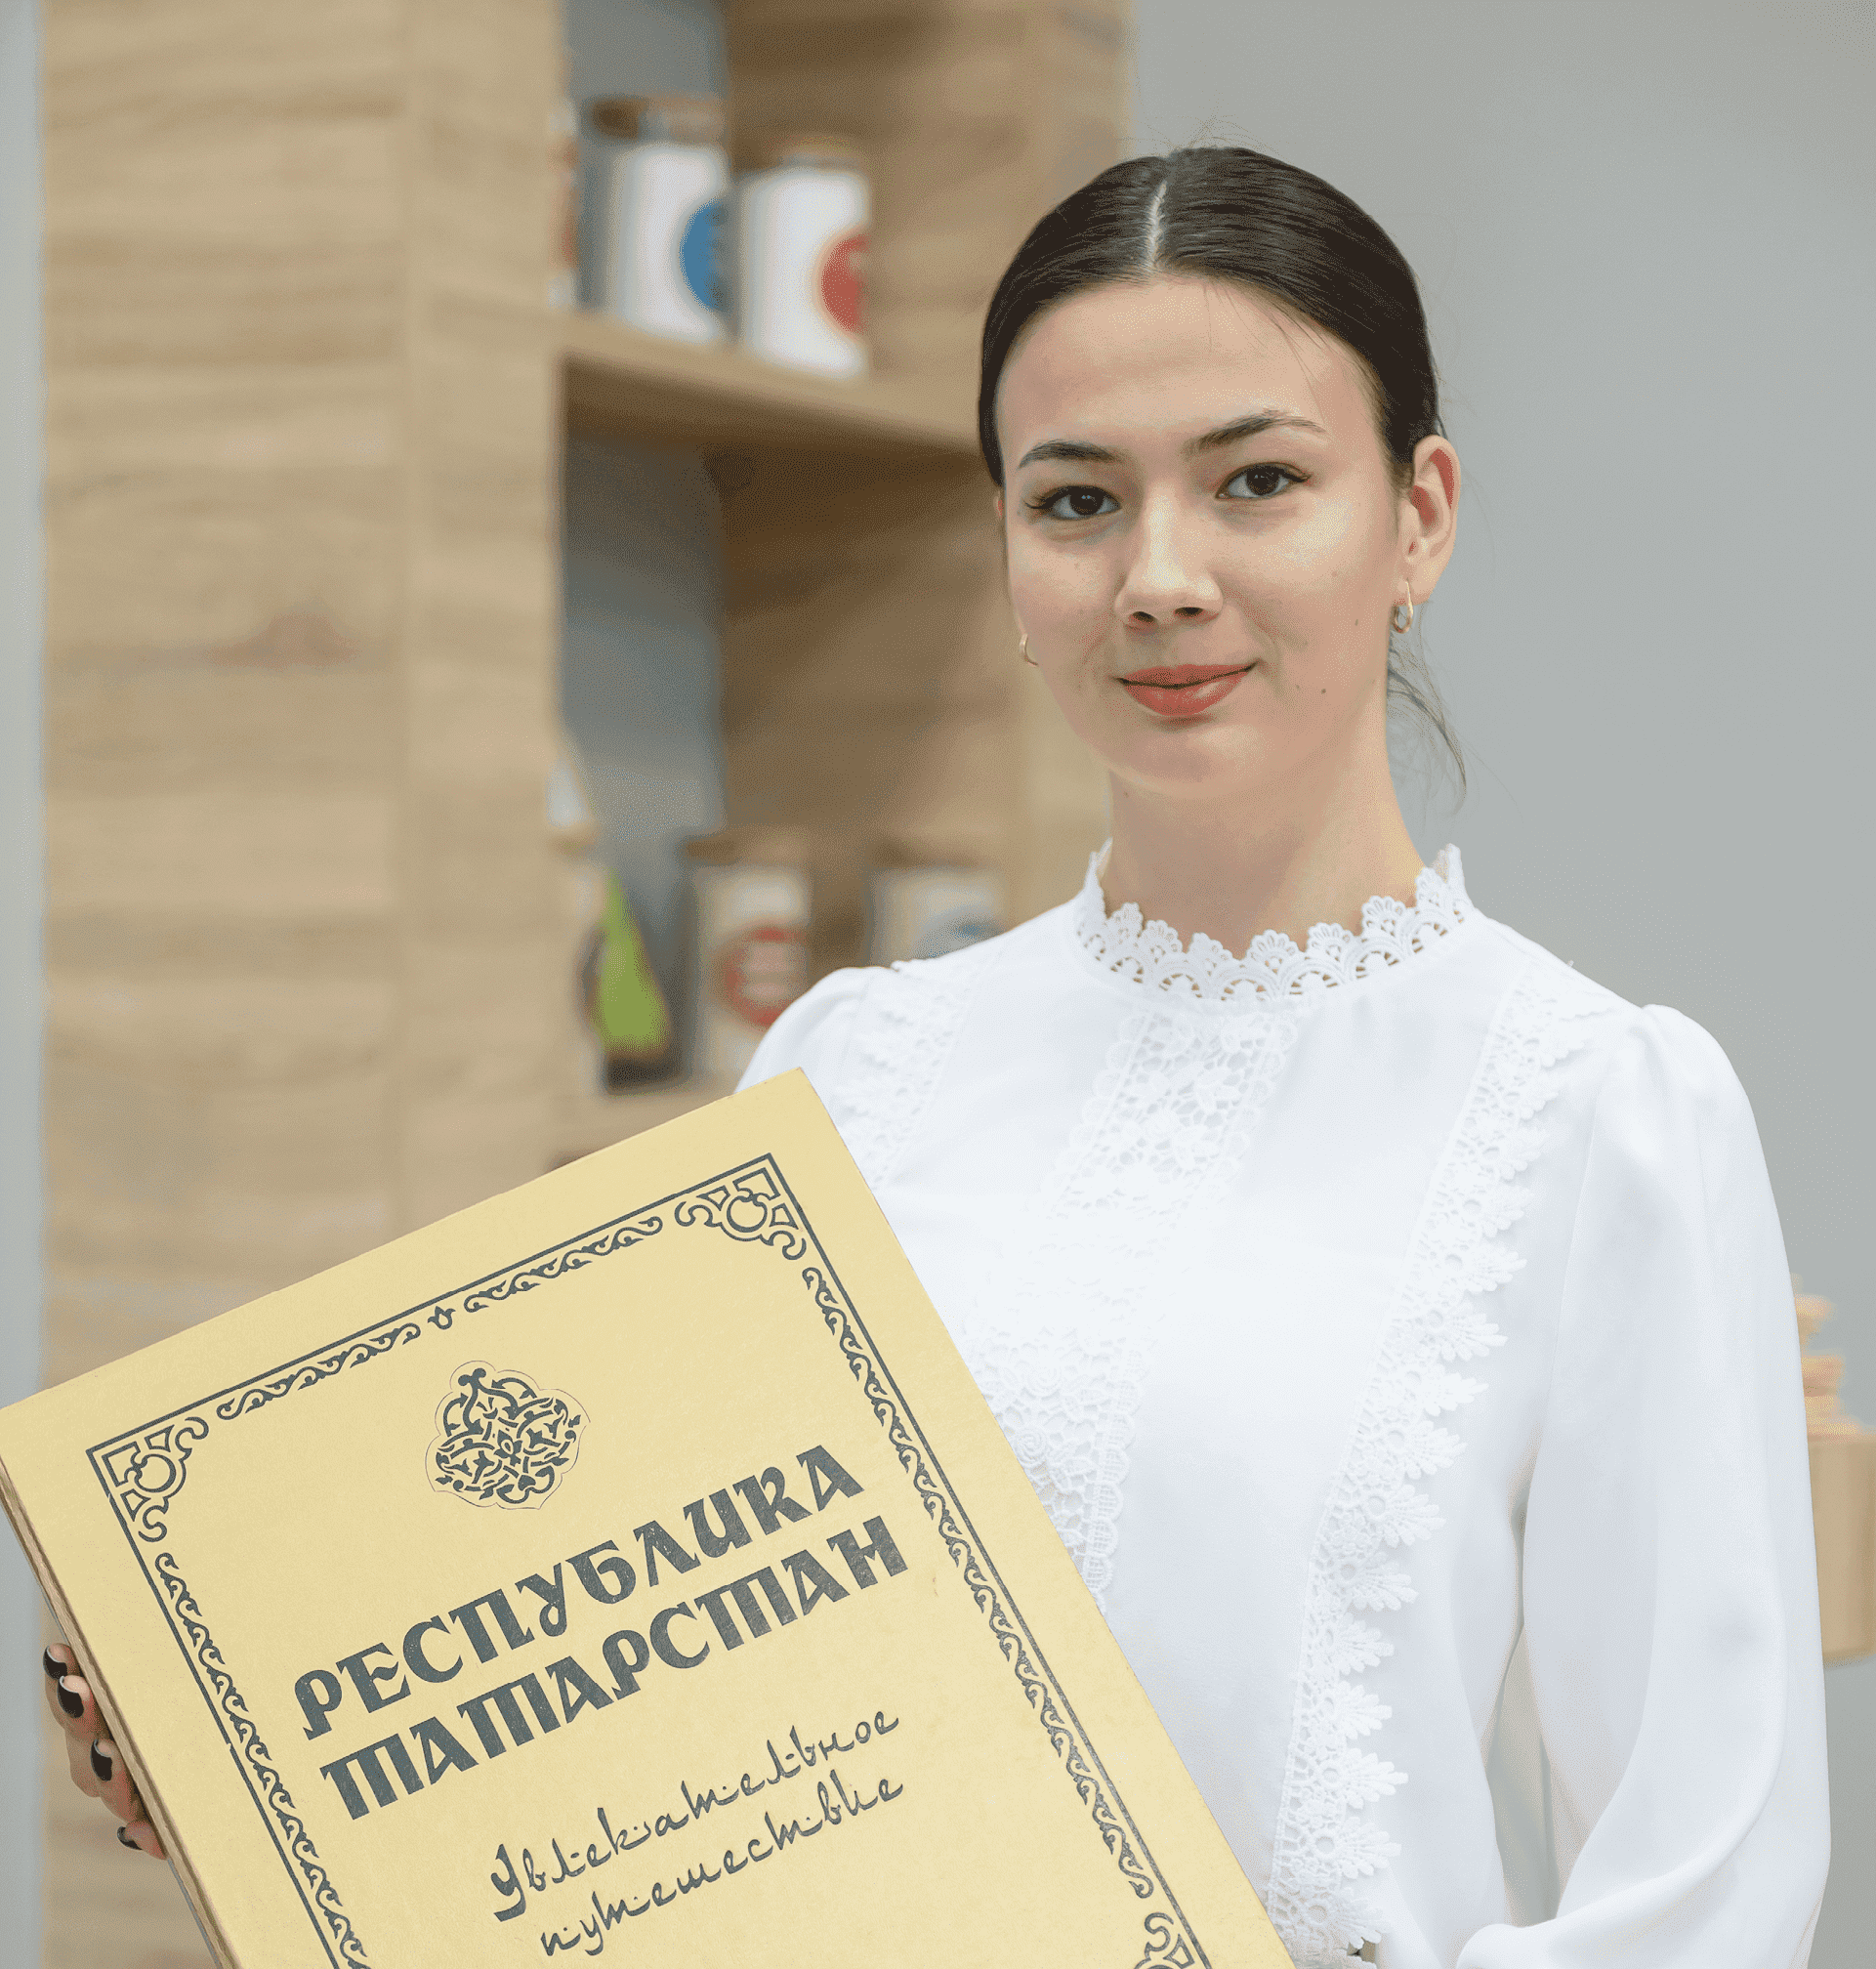 Student of Kazan State Agrarian University with a grant